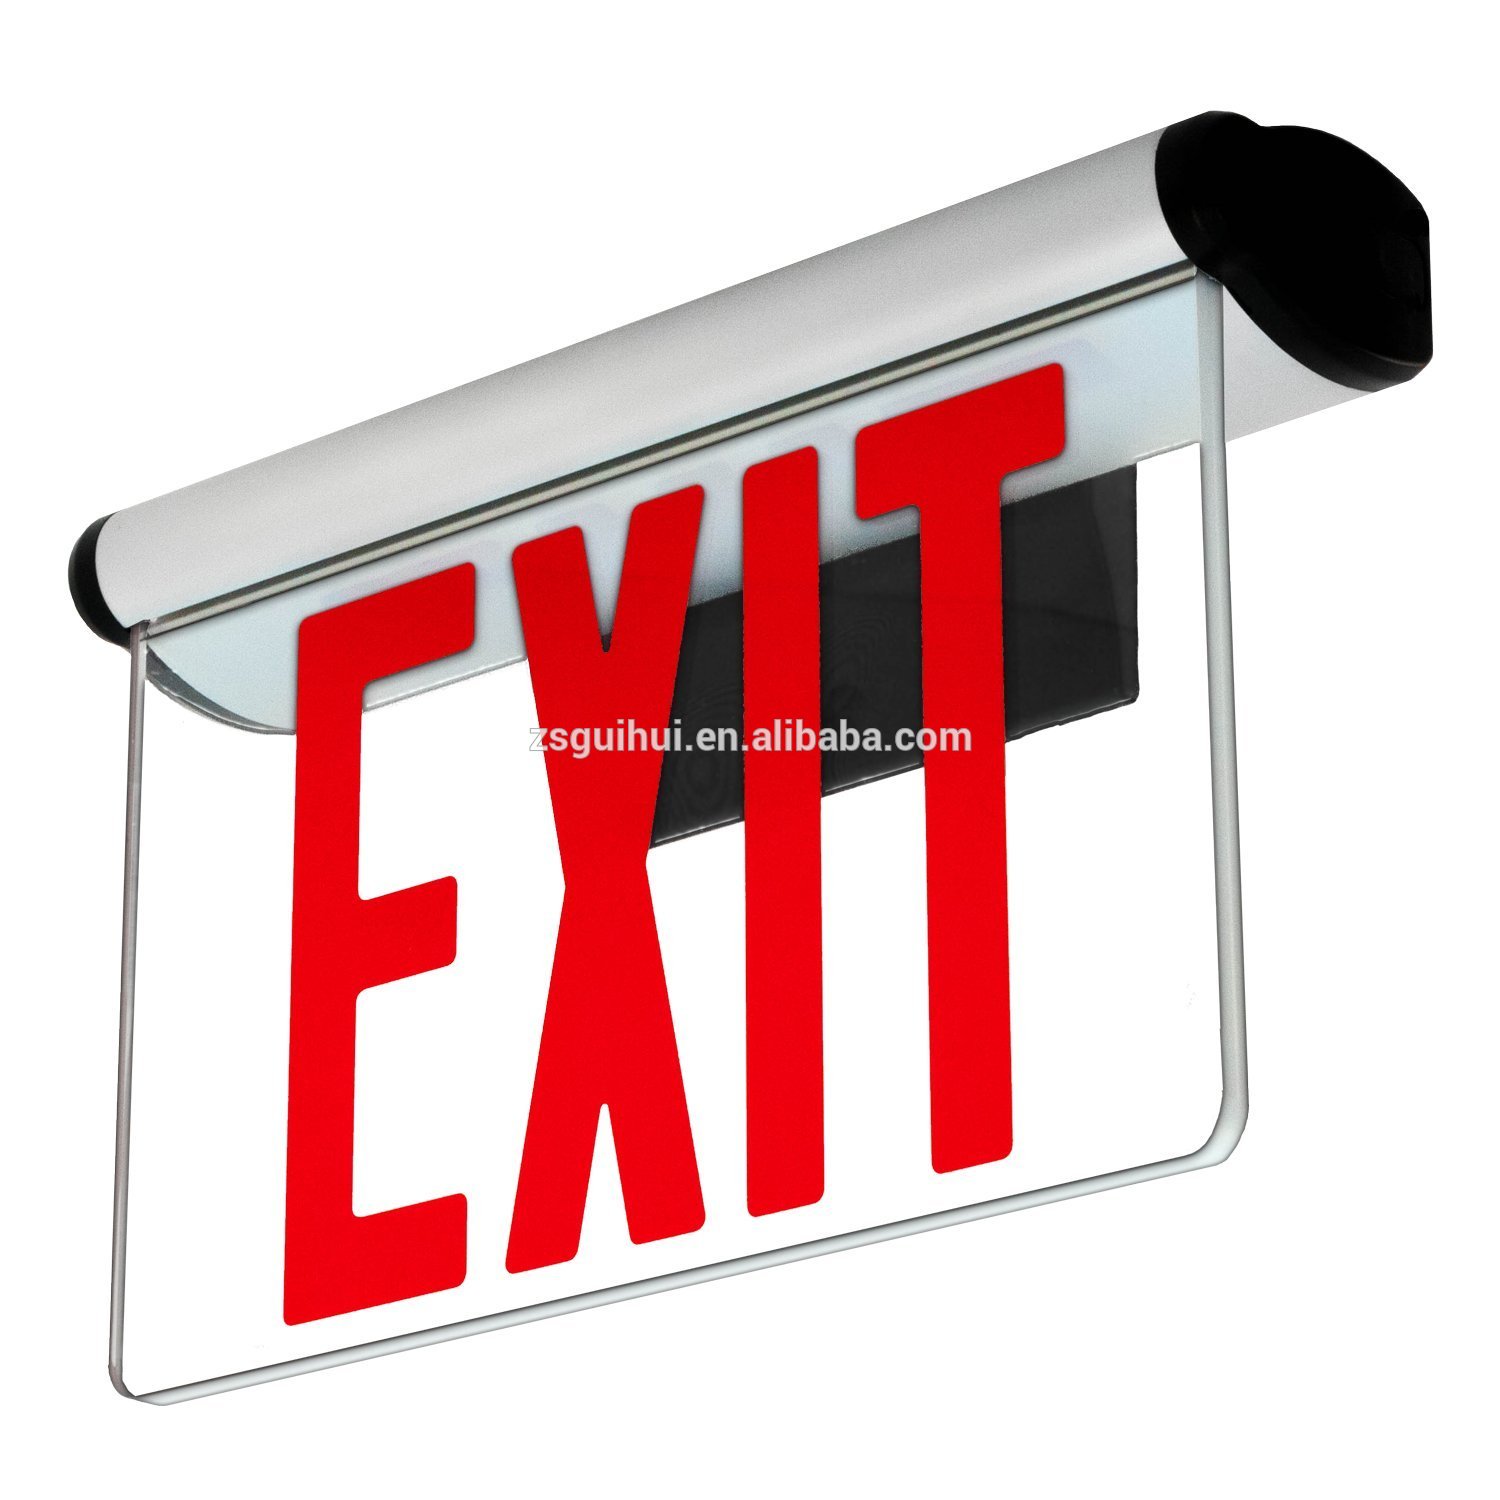 Self-powered saa emergency exit sign plate ceiling self test emergency led light luminous exit signs contained emergency light